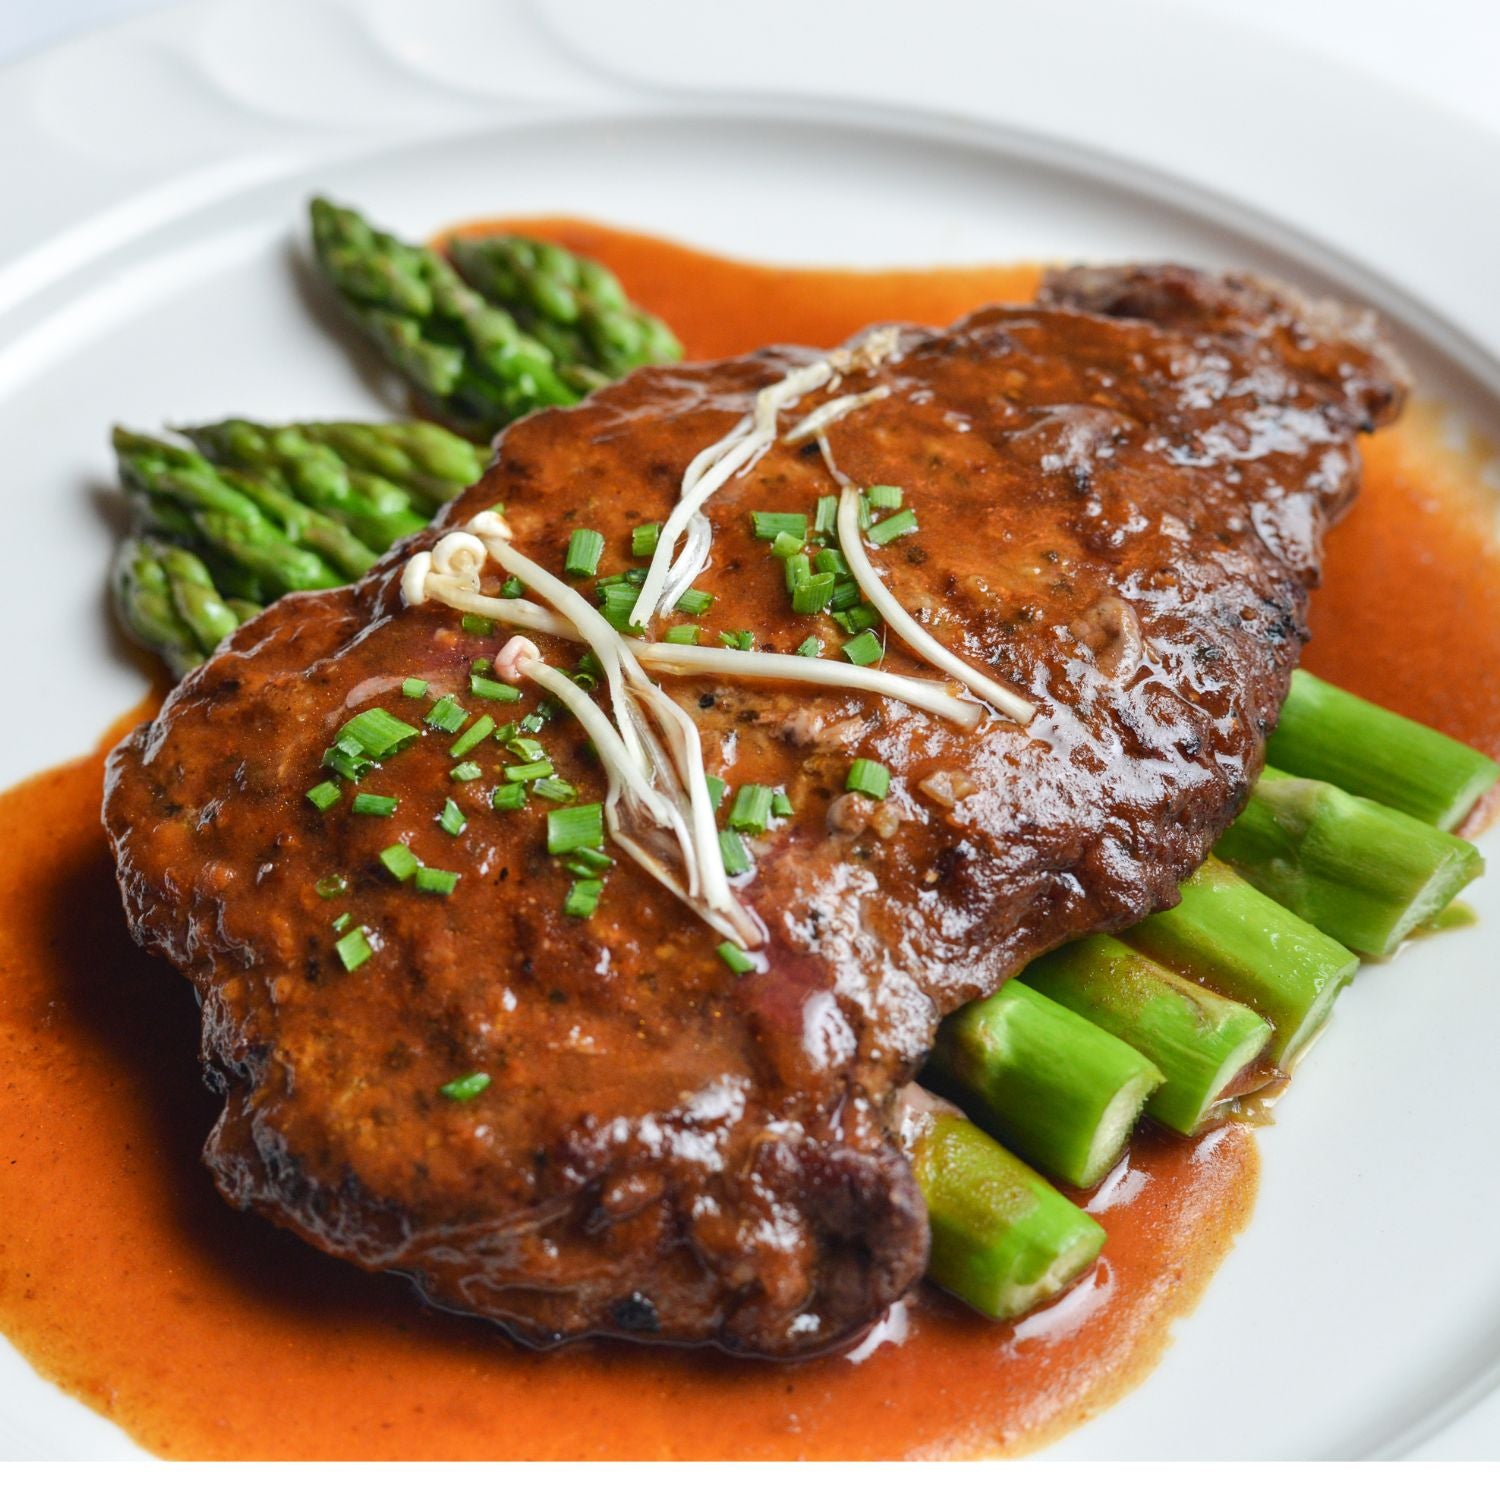 Steak diane: a bullet steak smothered in brown gravy to show what is a bullet steak